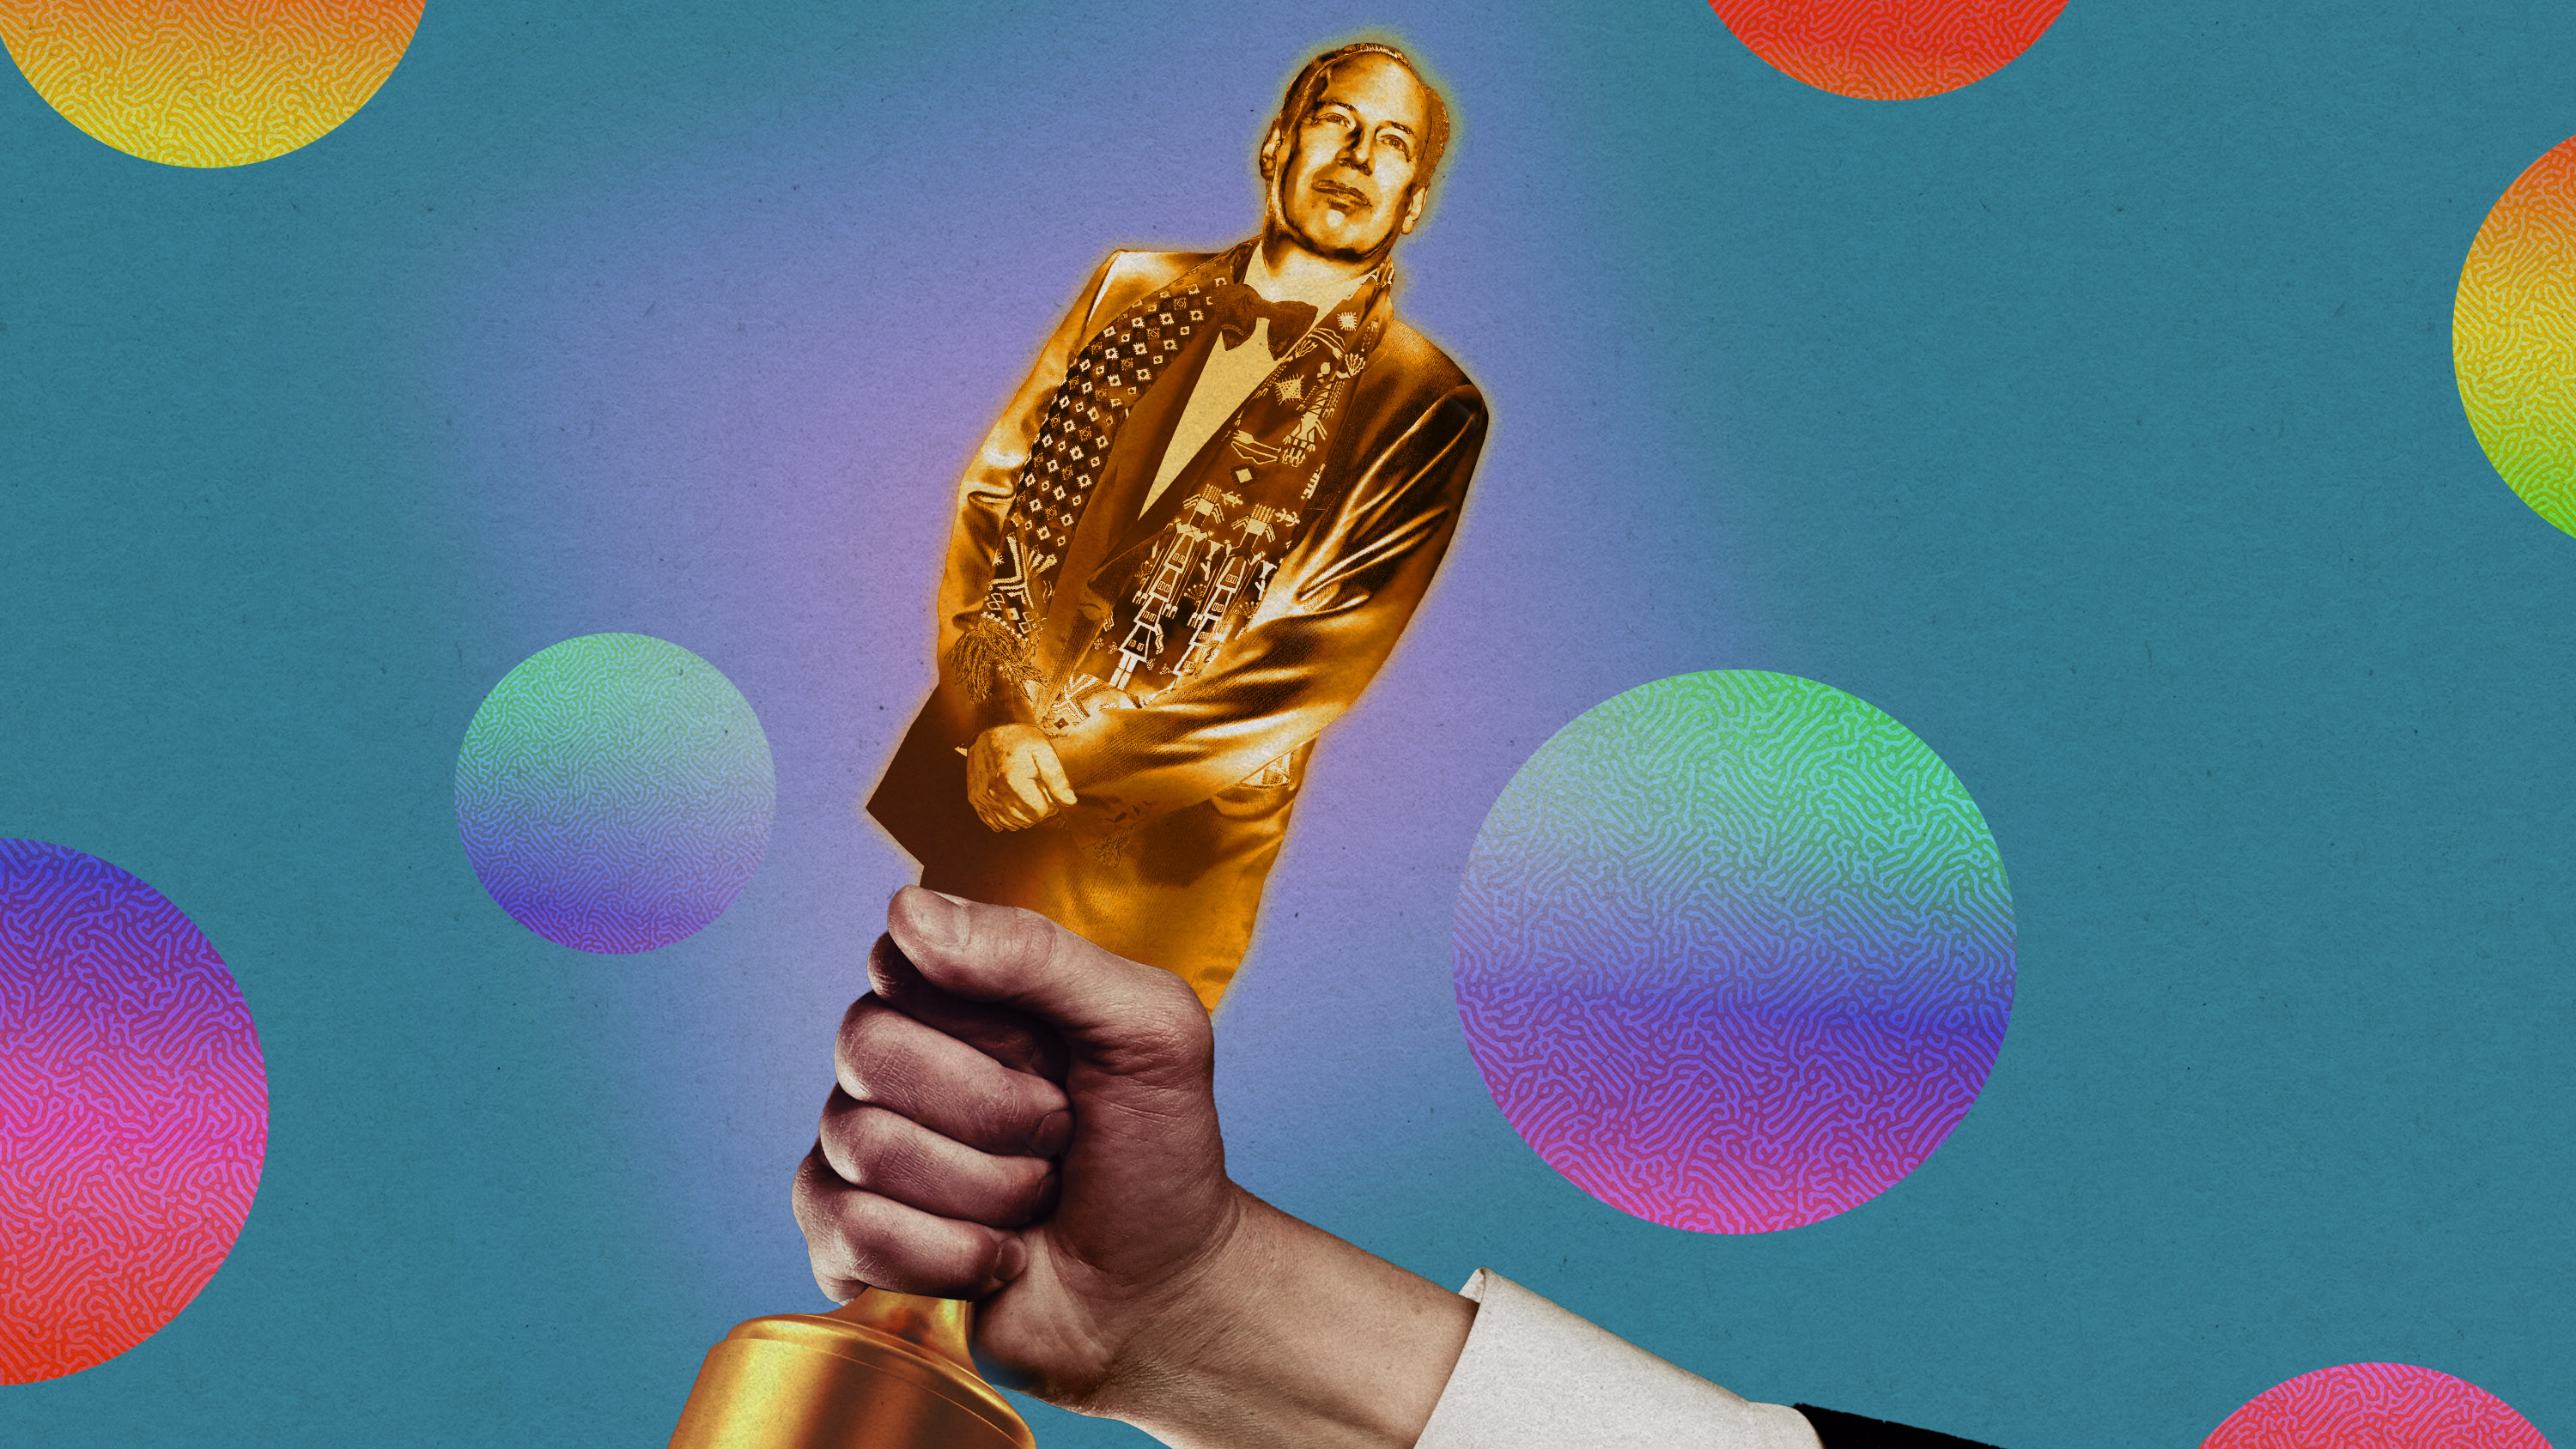 Hans Zimmer as the Academy Award winner statue, surrounded by floating rainbow bubbles